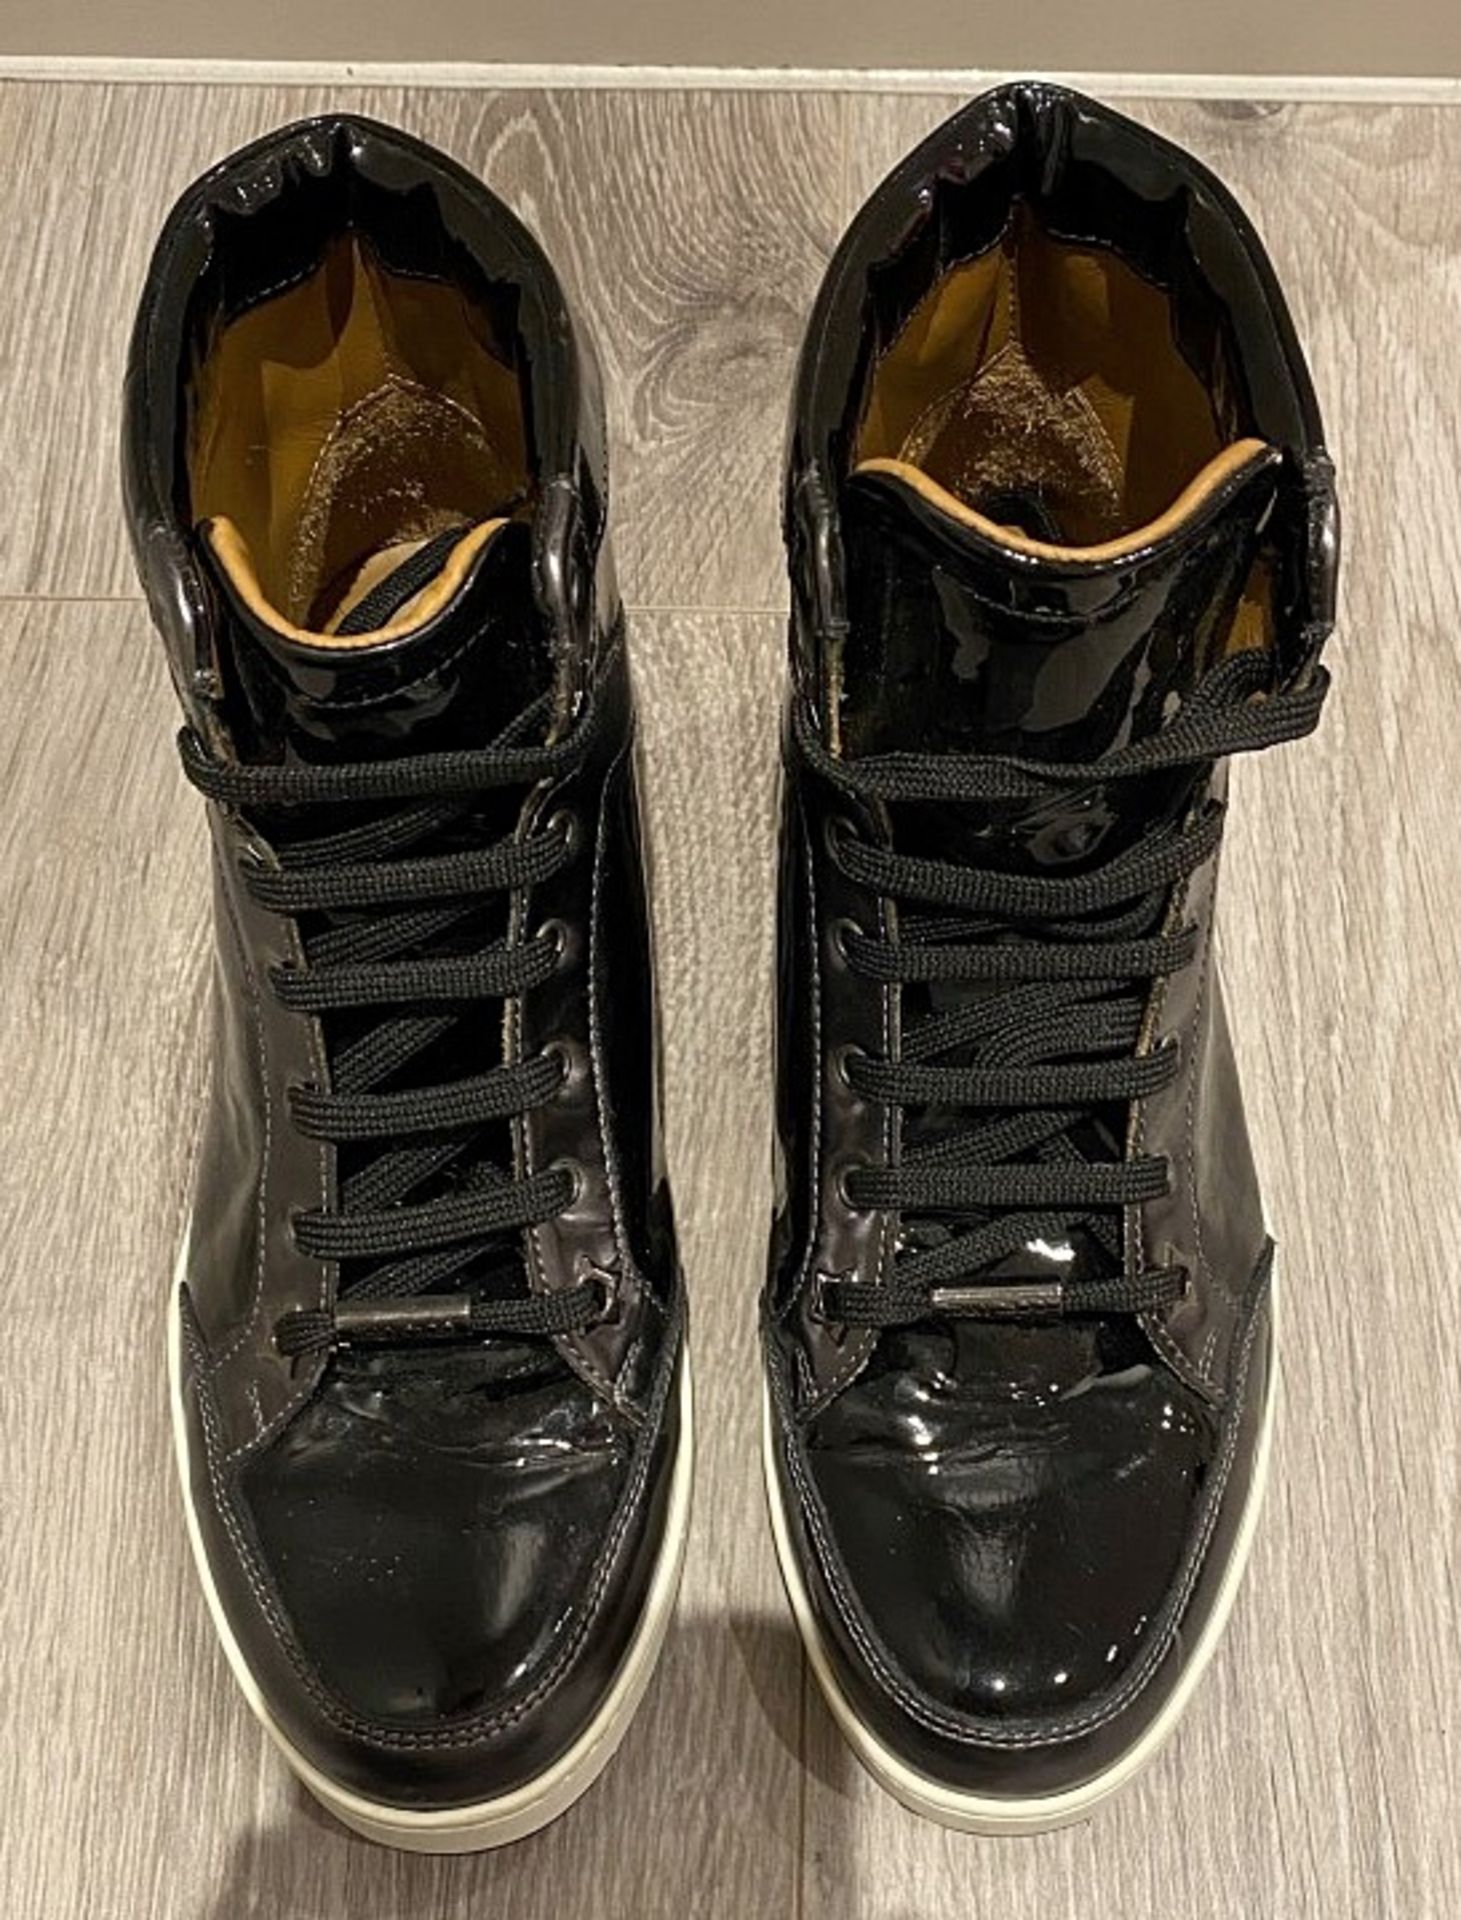 1 x Pair Of Genuine Jimmy Choo Sneakers In Black Patent - Size: 36 - Preowned in Very Good Condition - Image 4 of 6